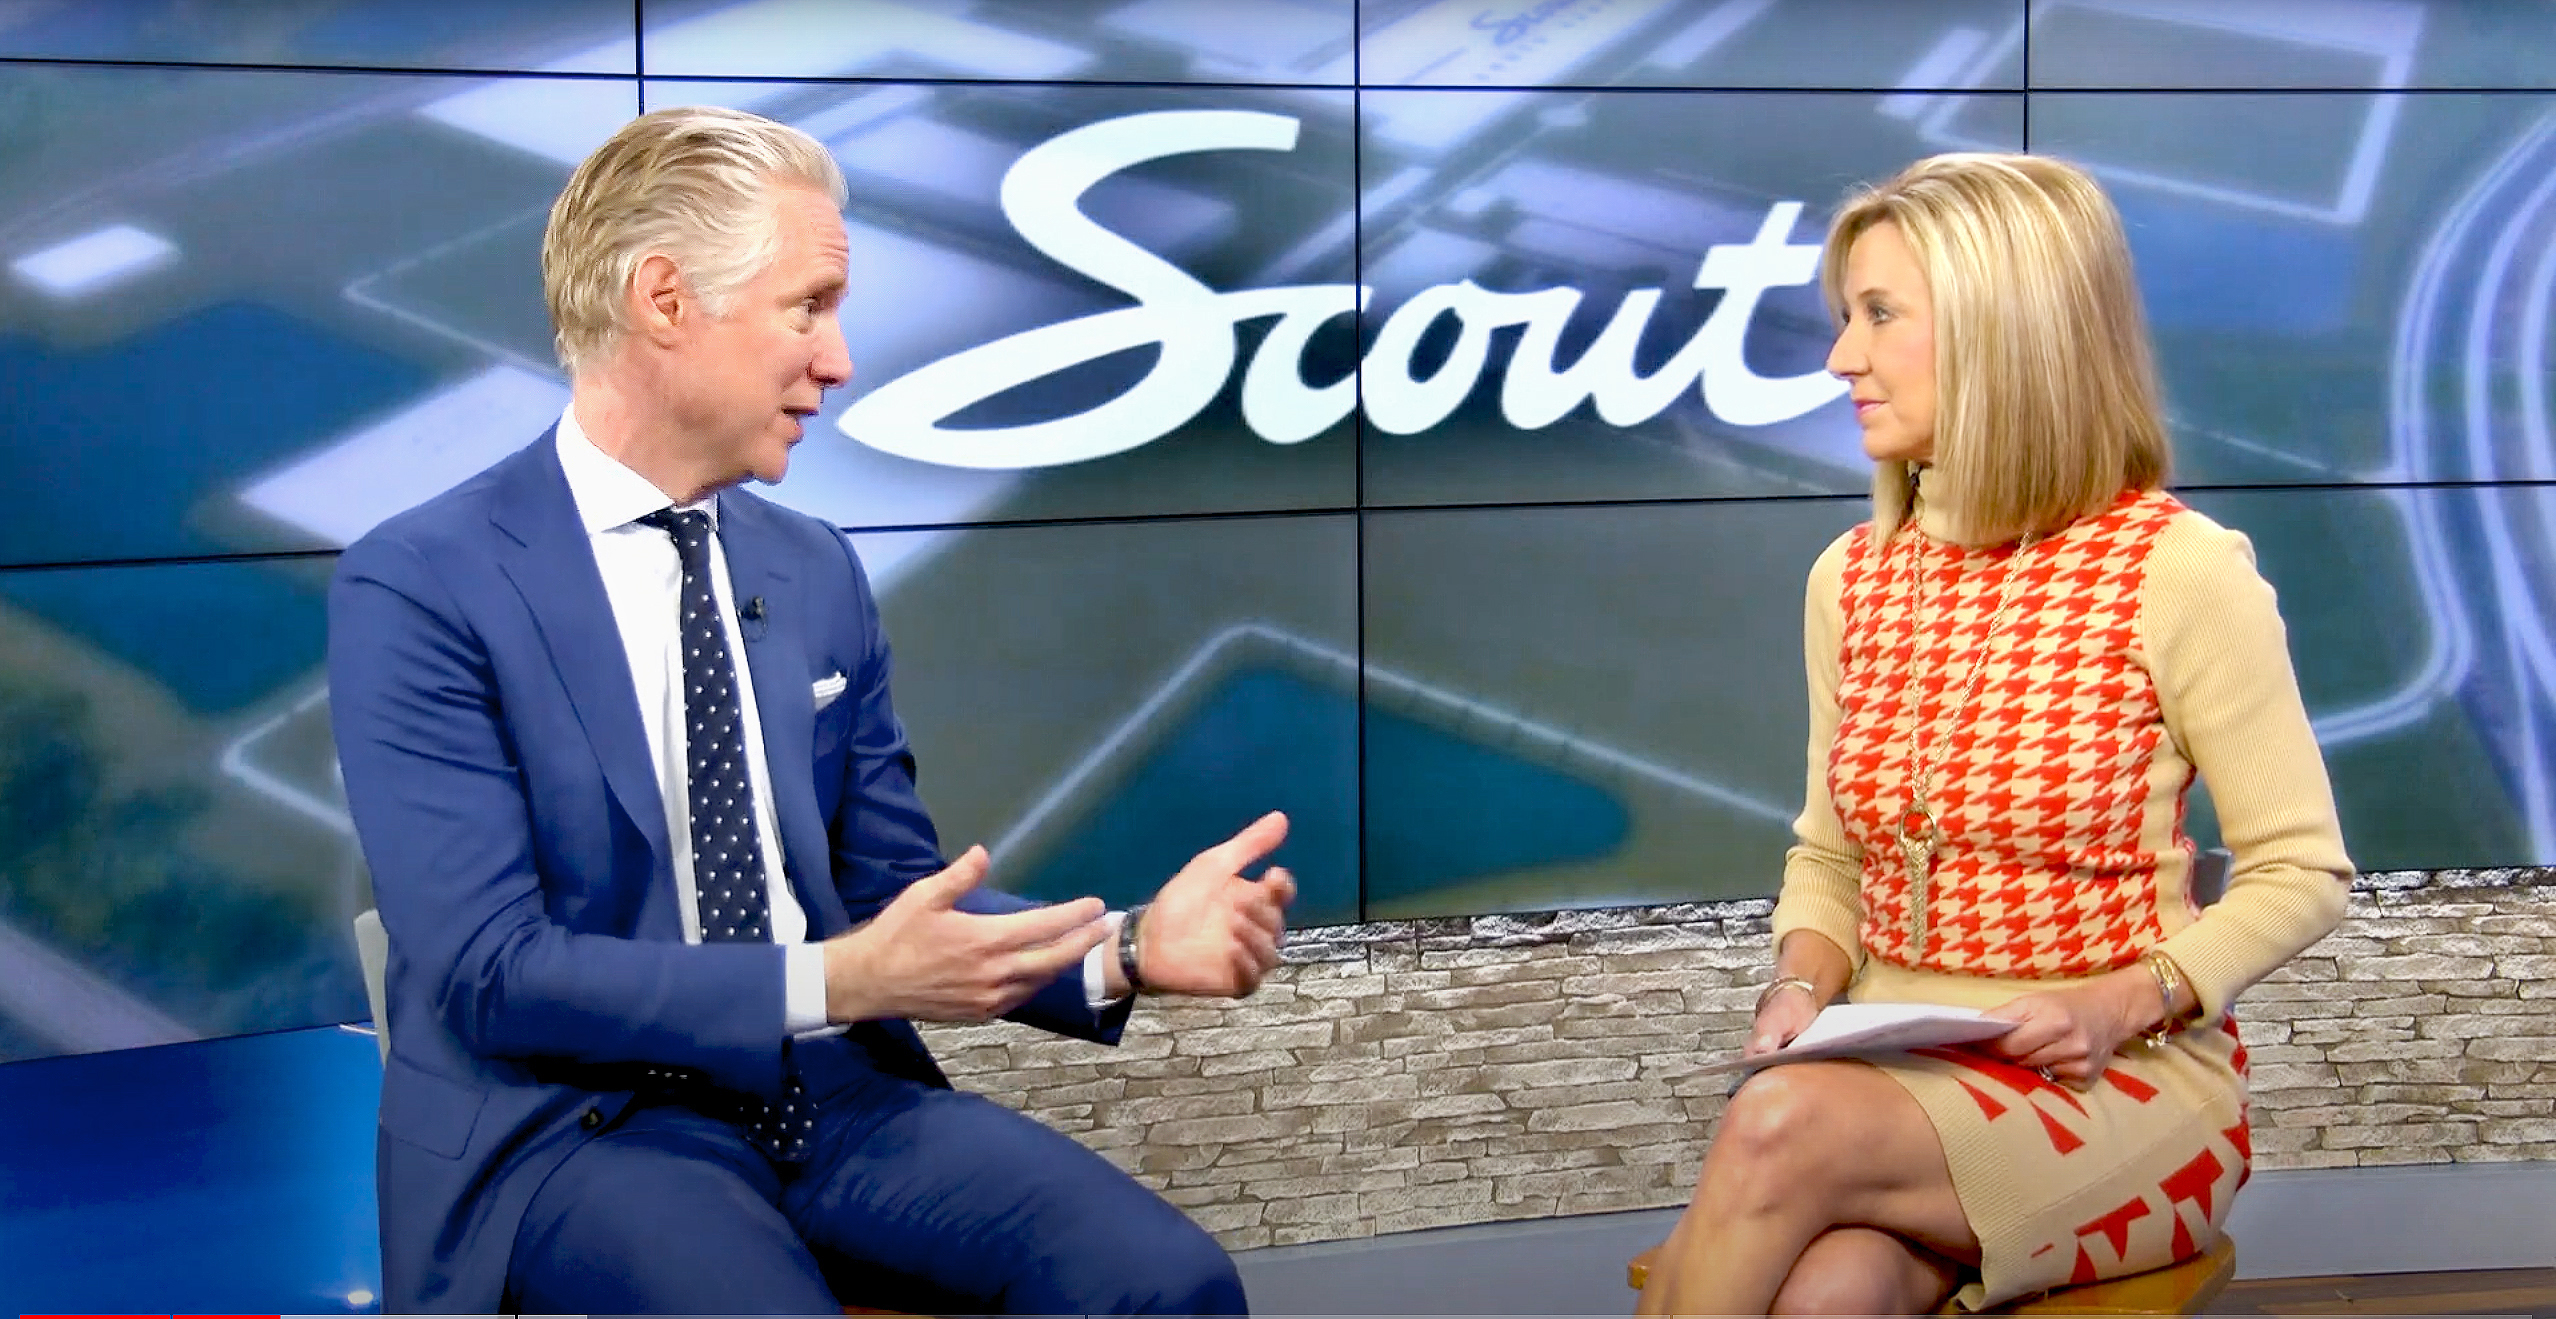 Scott Keogh, Scout Motors’ president and chief executive officer, was interviewed by Dawndy Mercer Plank, WIS TV News, about Scout Motors’ plans to hire 4,000 workers to produce 200,000 electric vehicles per year at a facility on 1,100 acres along I-77 in Northern Richland County. Production is slated to begin in 2026. 